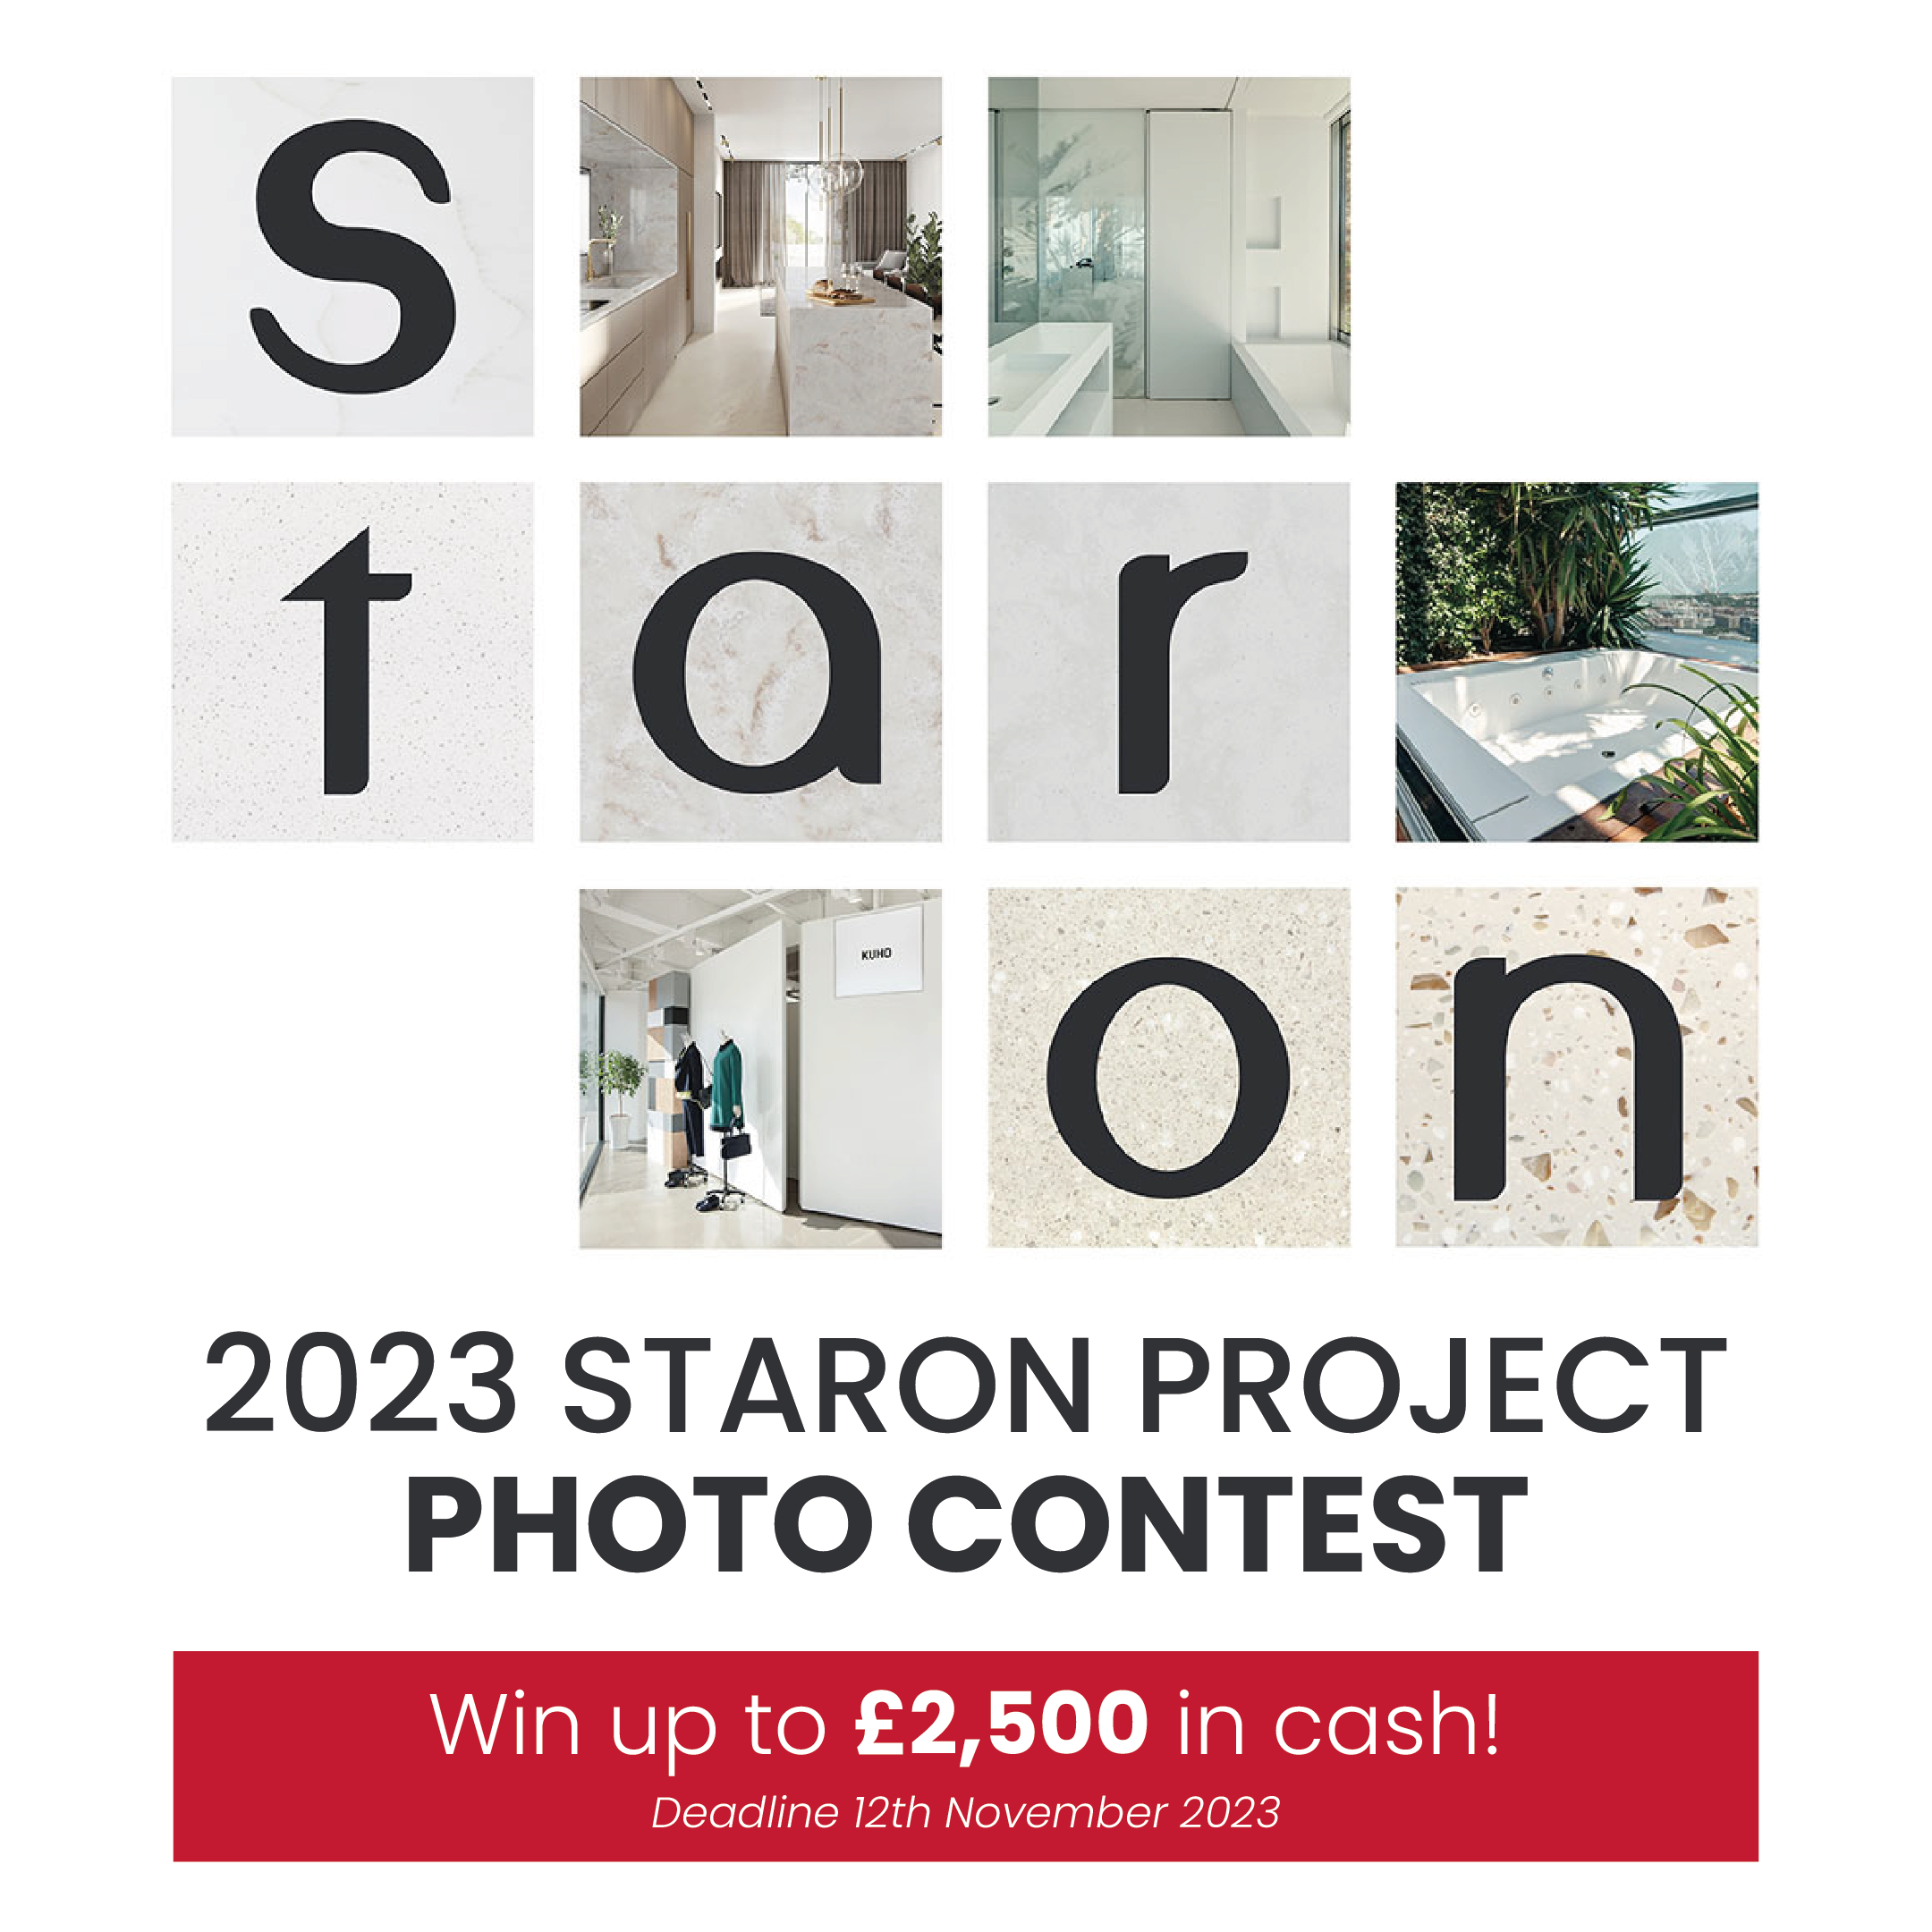 The 2023 Staron Project Photo Contest Is Here!